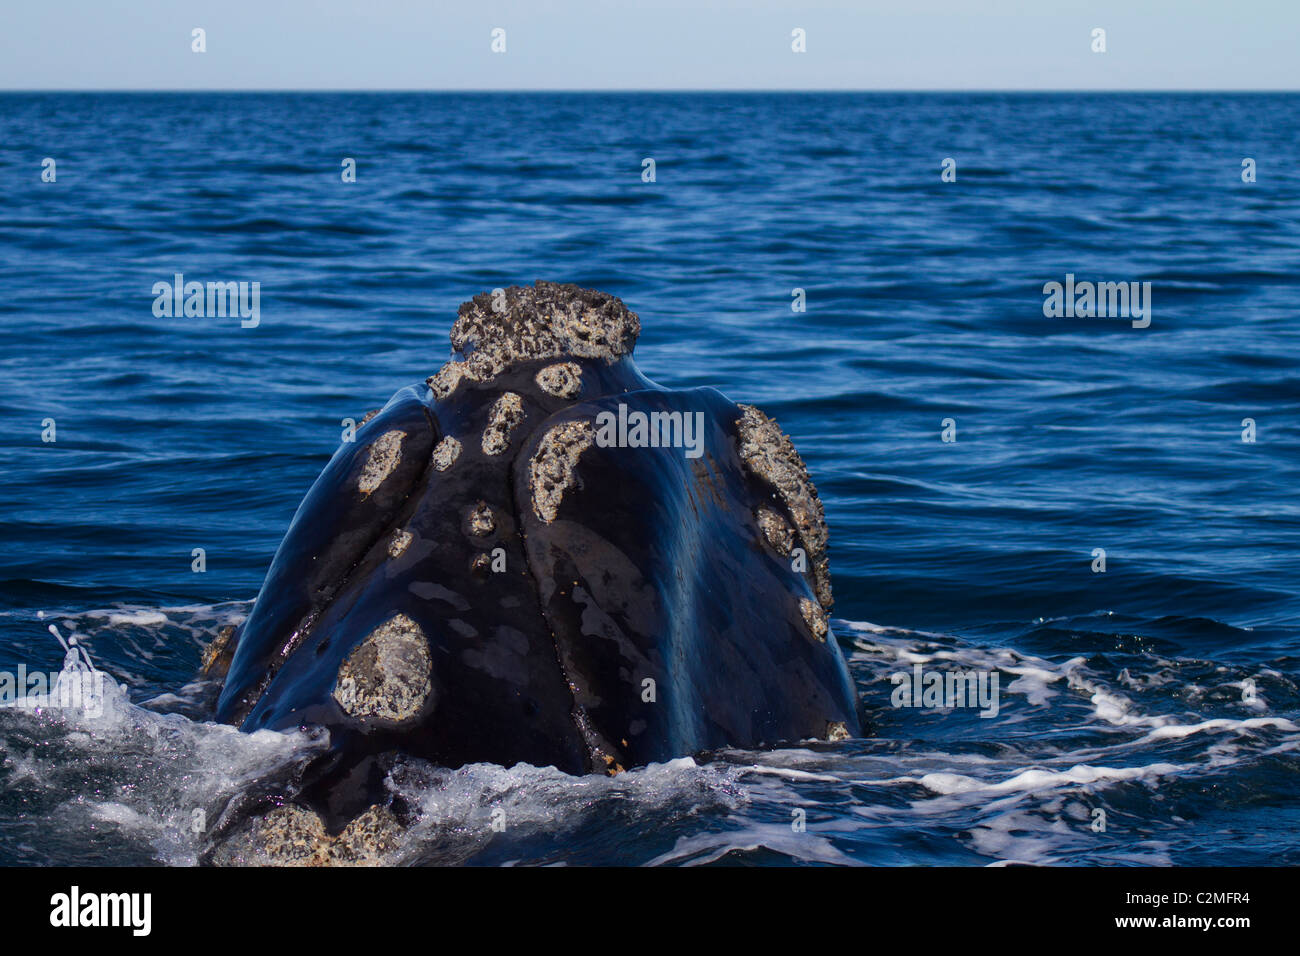 Southern right whale surfaces, Golfo Nuevo, Argentina Stock Photo